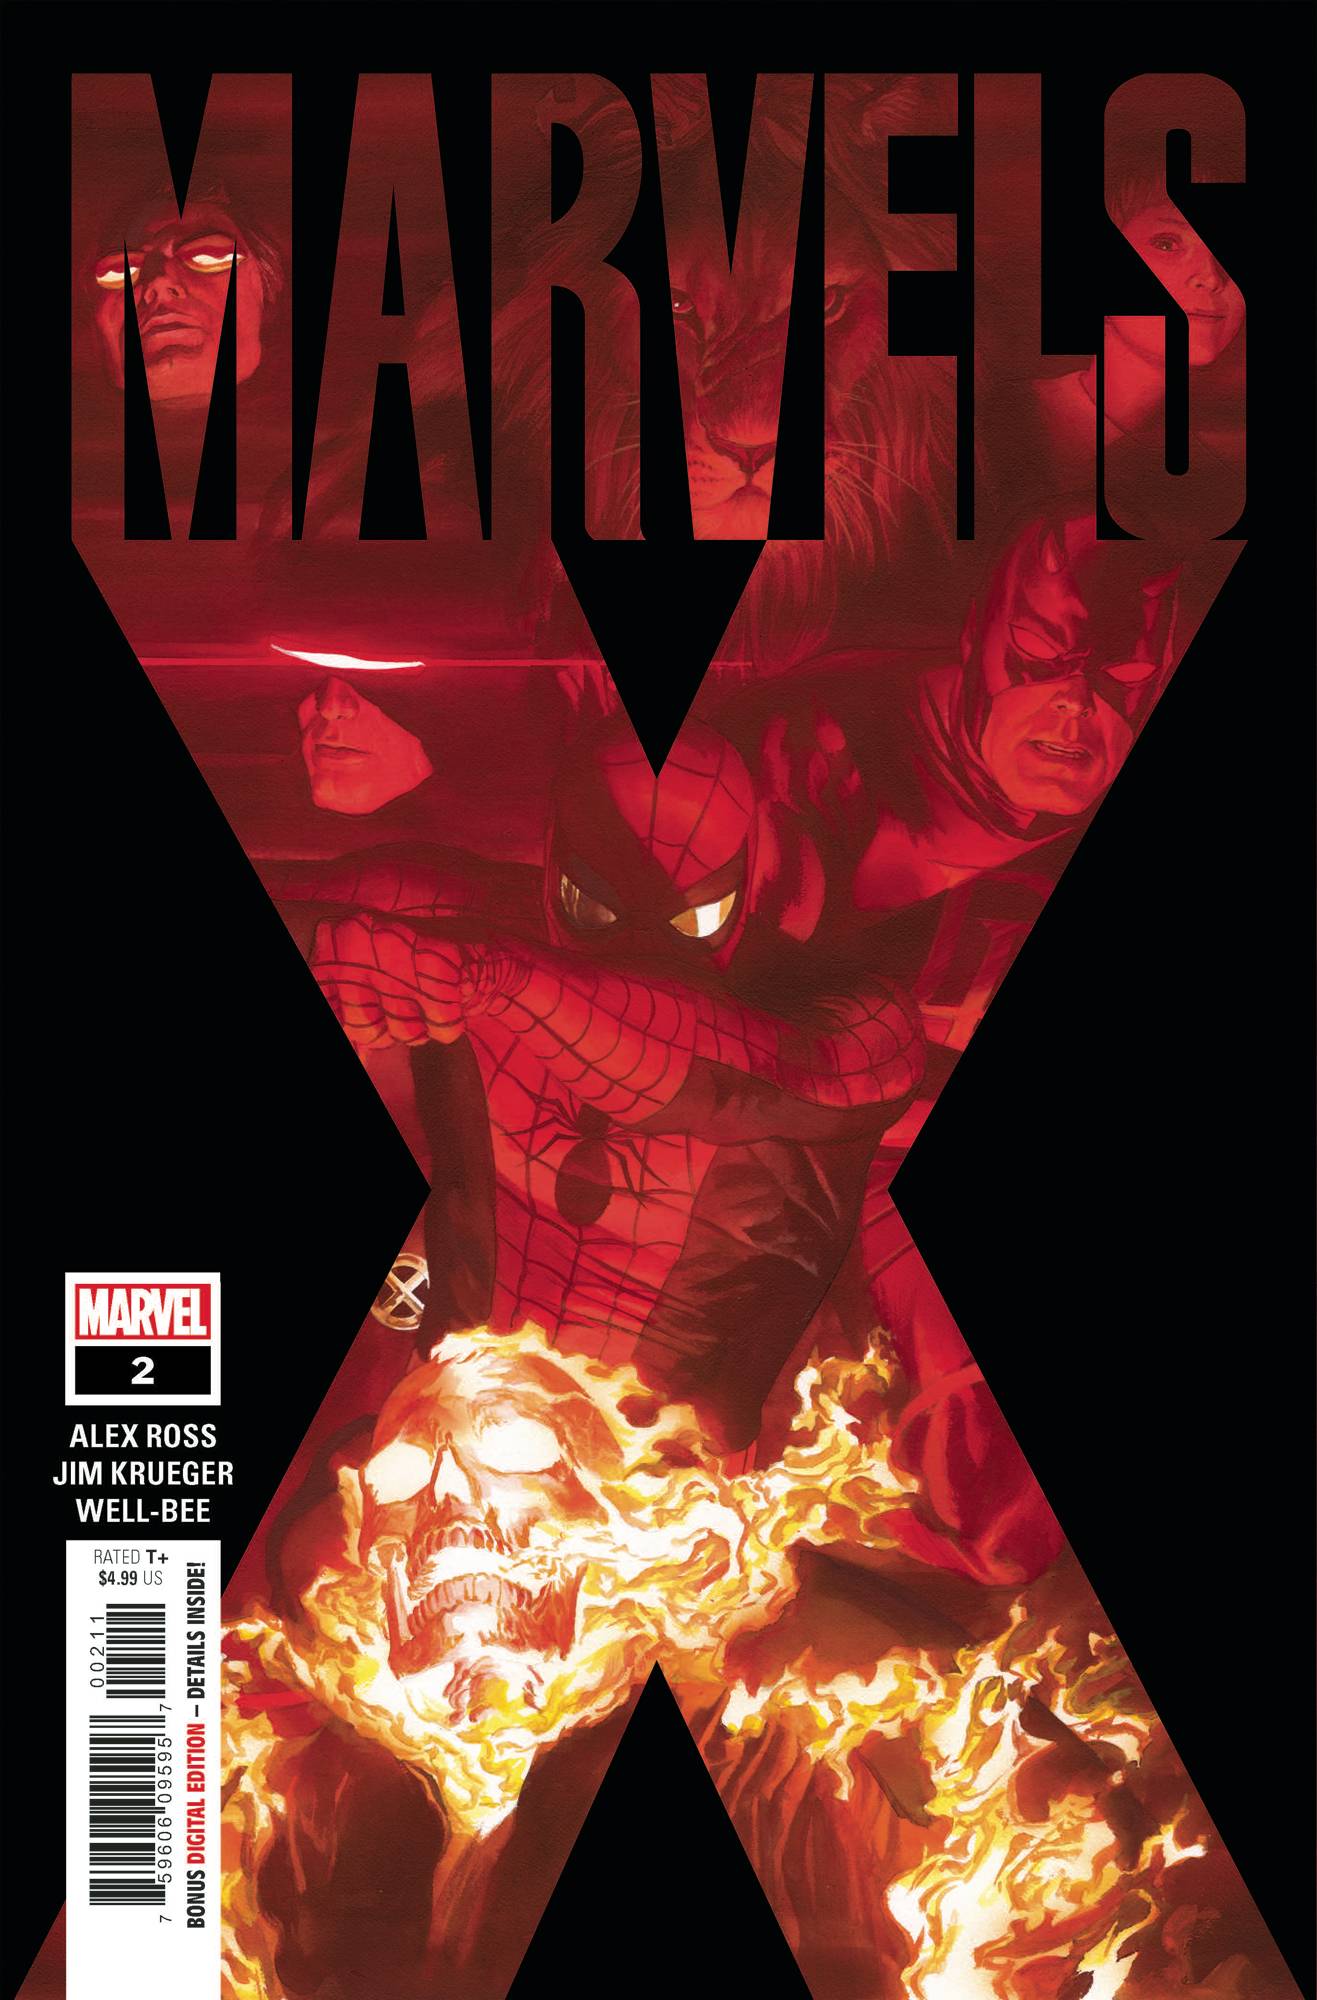 Marvels X (2020) #2 (of 6)